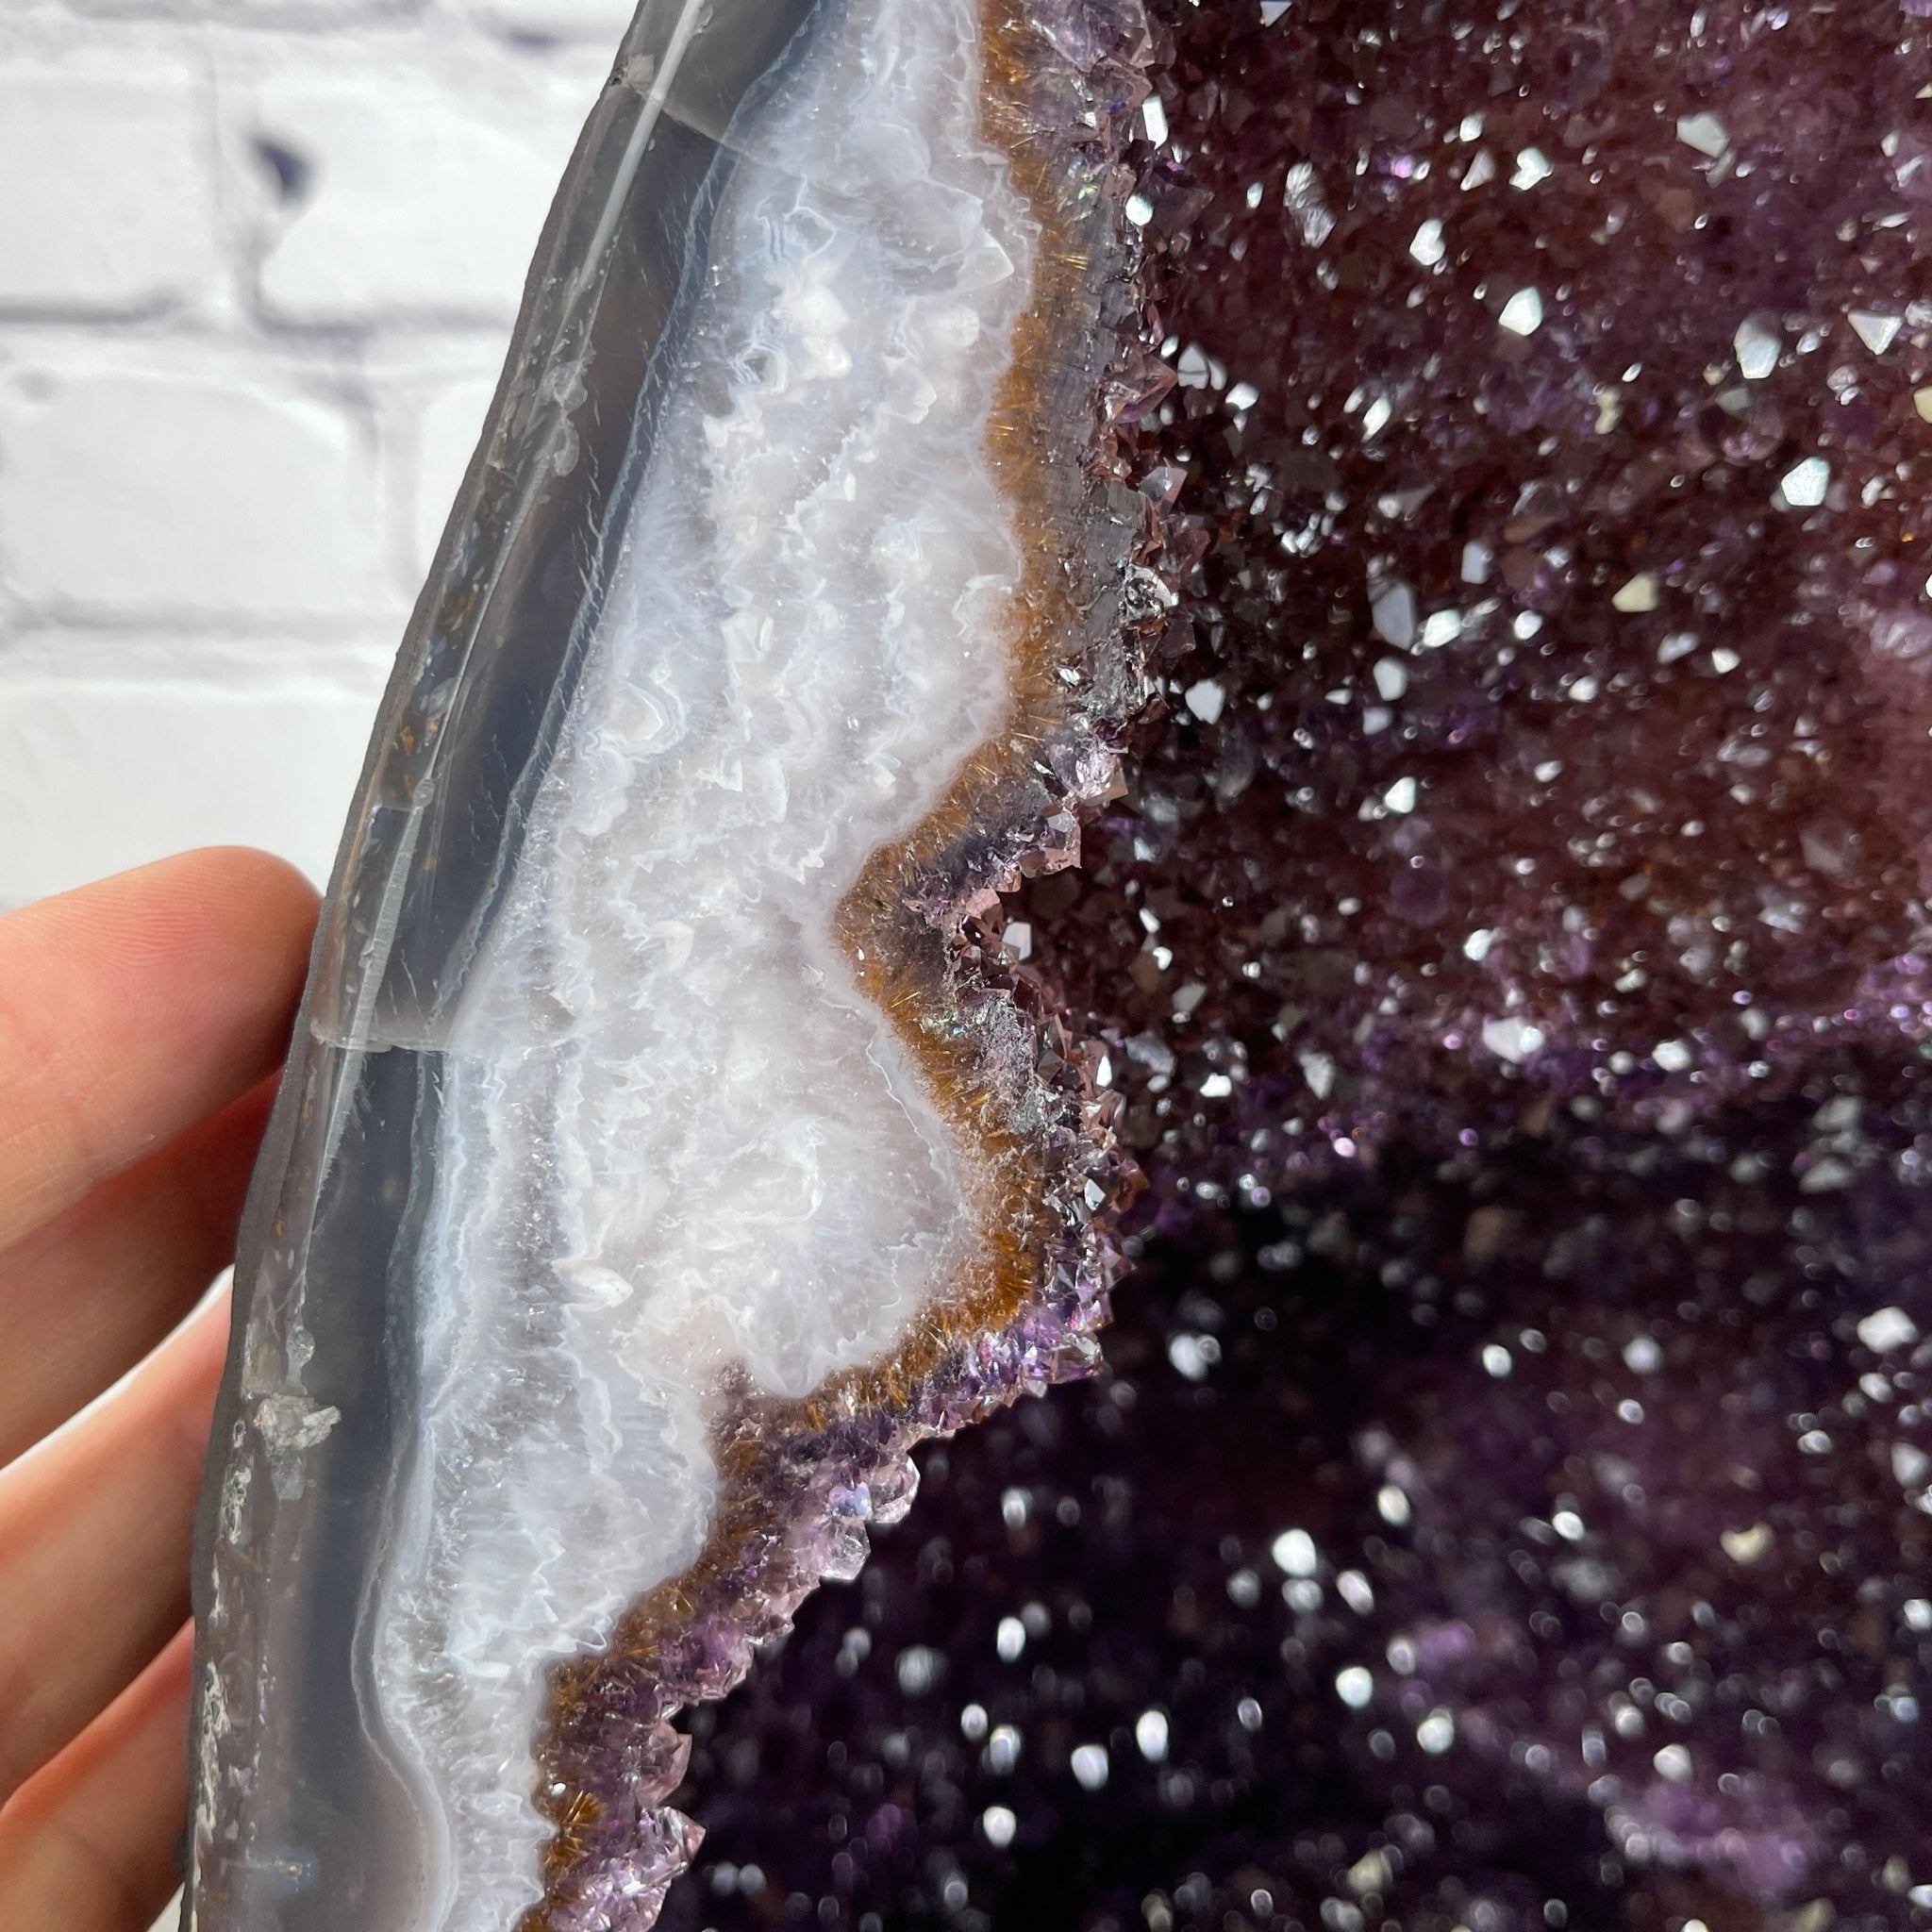 Extra Quality Brazilian Amethyst Cathedral, 20” tall & 57.1 lbs #5601-0440 by Brazil Gems - Brazil GemsBrazil GemsExtra Quality Brazilian Amethyst Cathedral, 20” tall & 57.1 lbs #5601-0440 by Brazil GemsCathedrals5601-0440